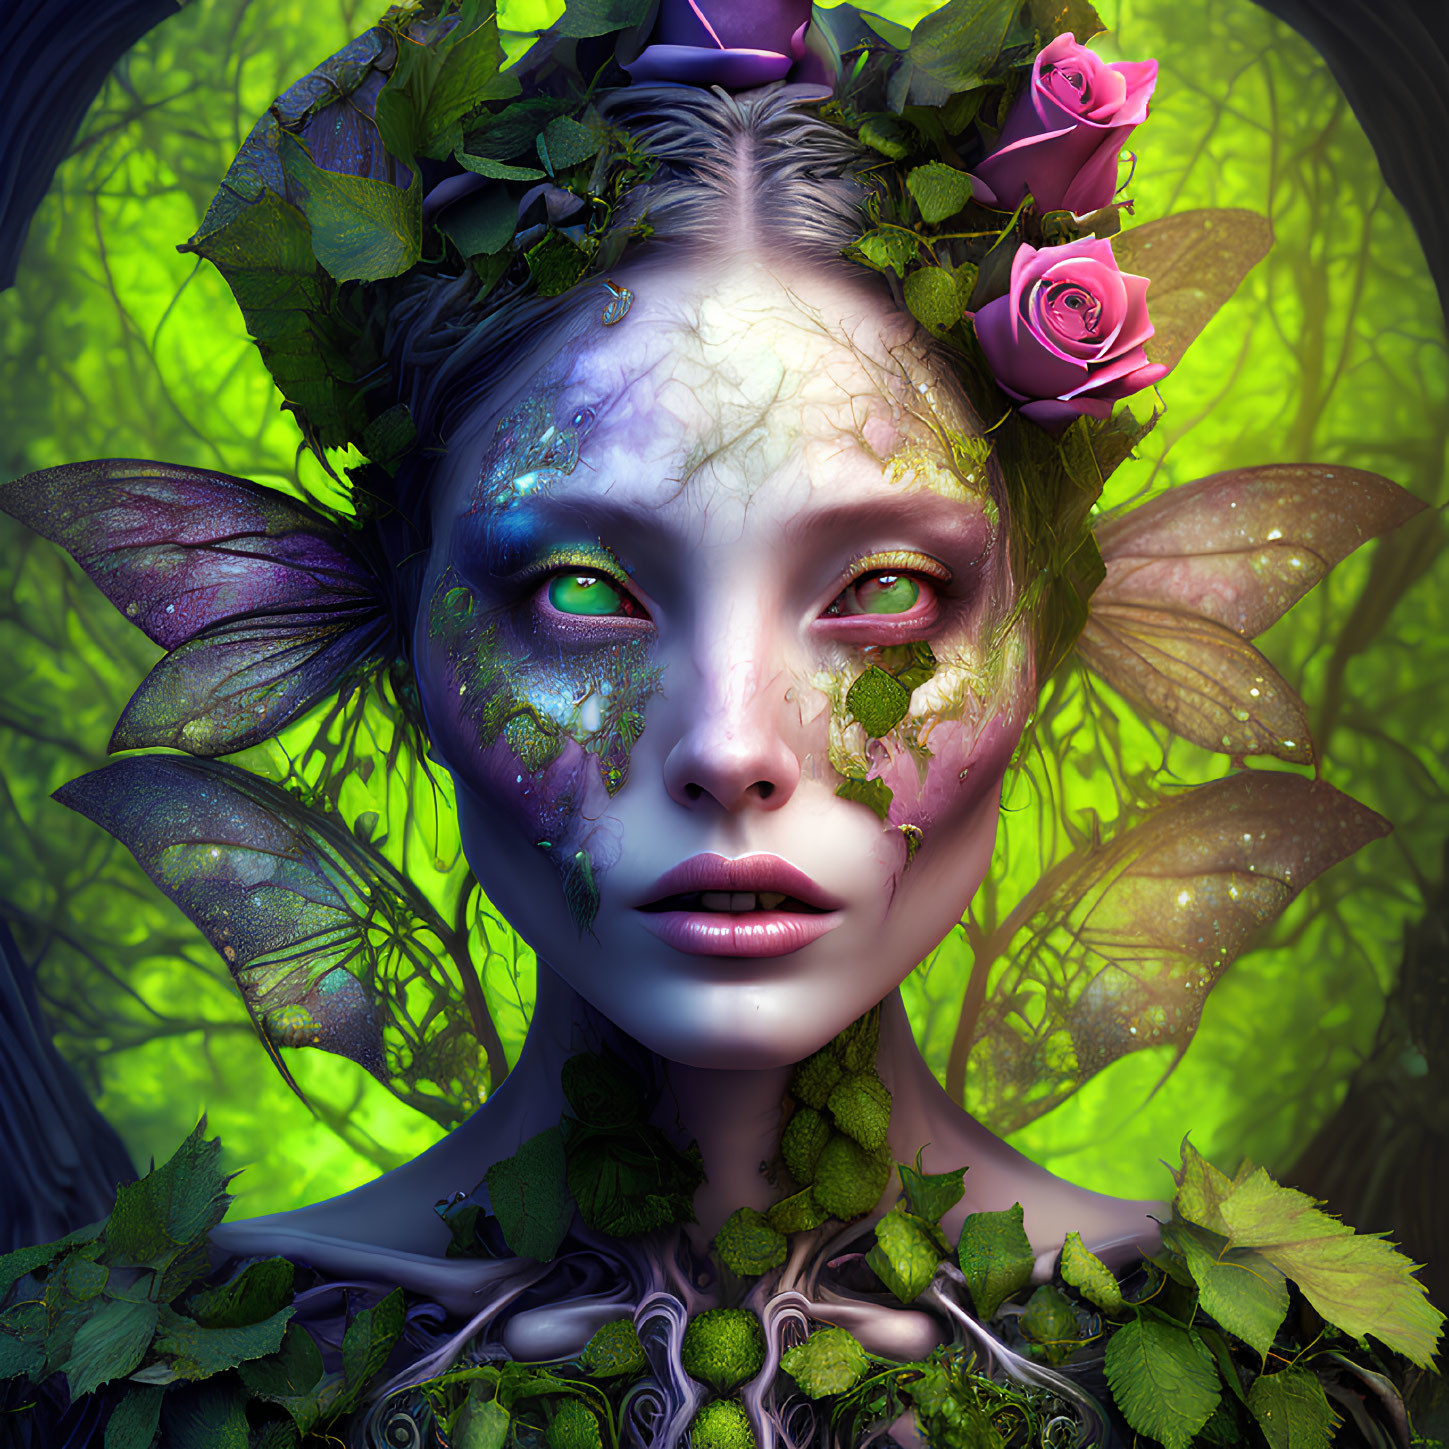 Fantastical portrait of female figure with green and purple skin and floral adornments.